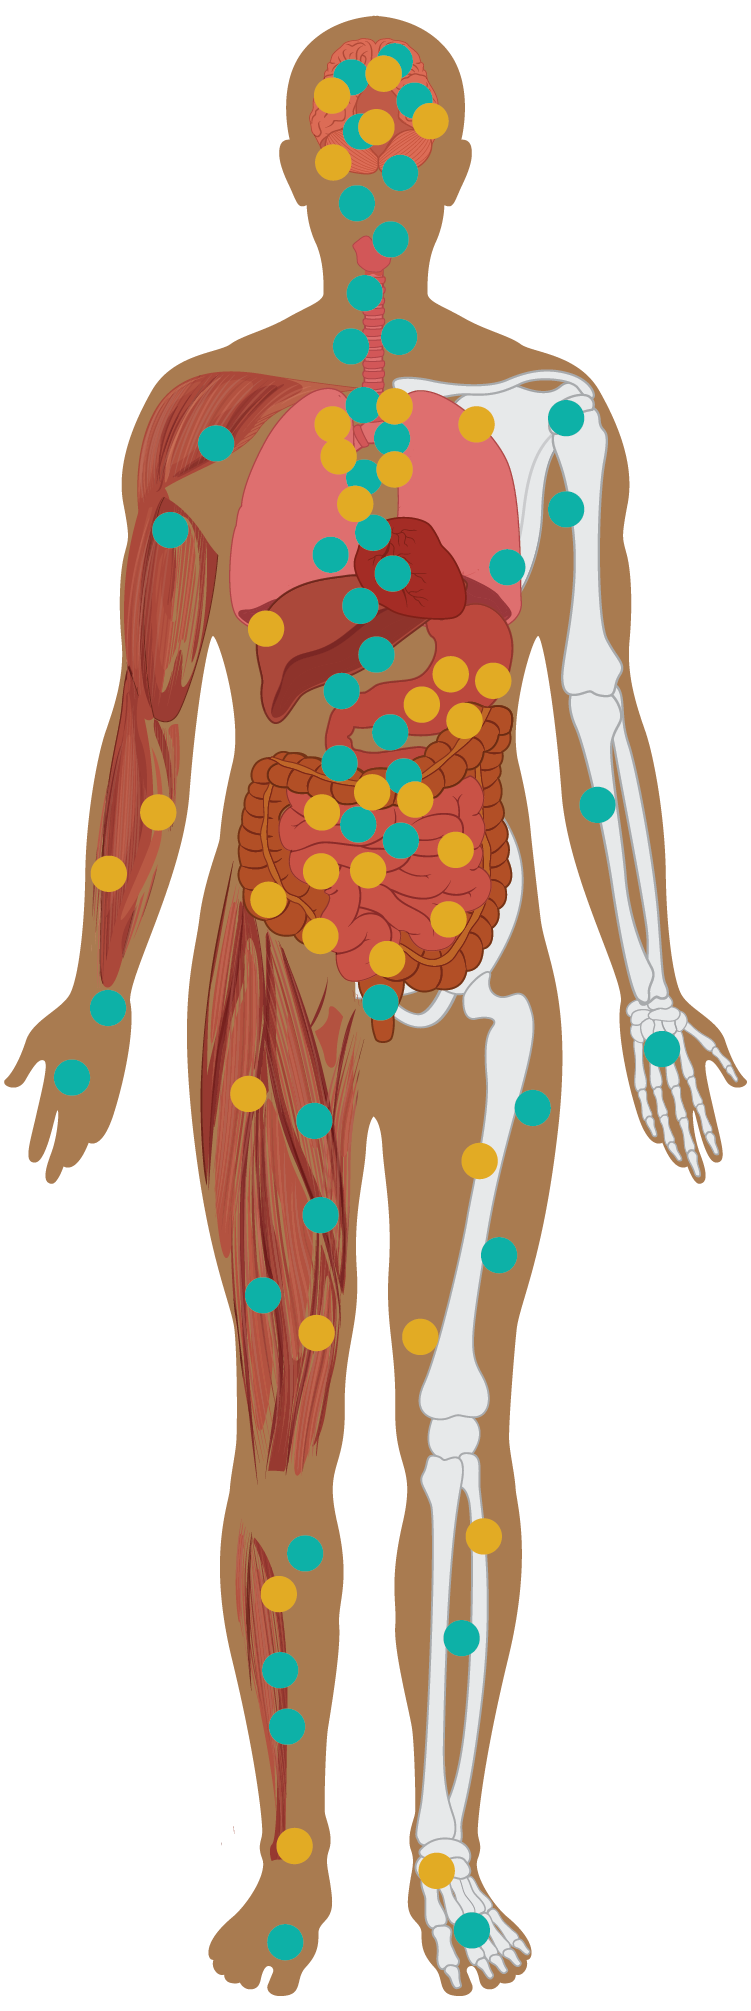 Body icon with organ systems and ECS receptor dots across the body